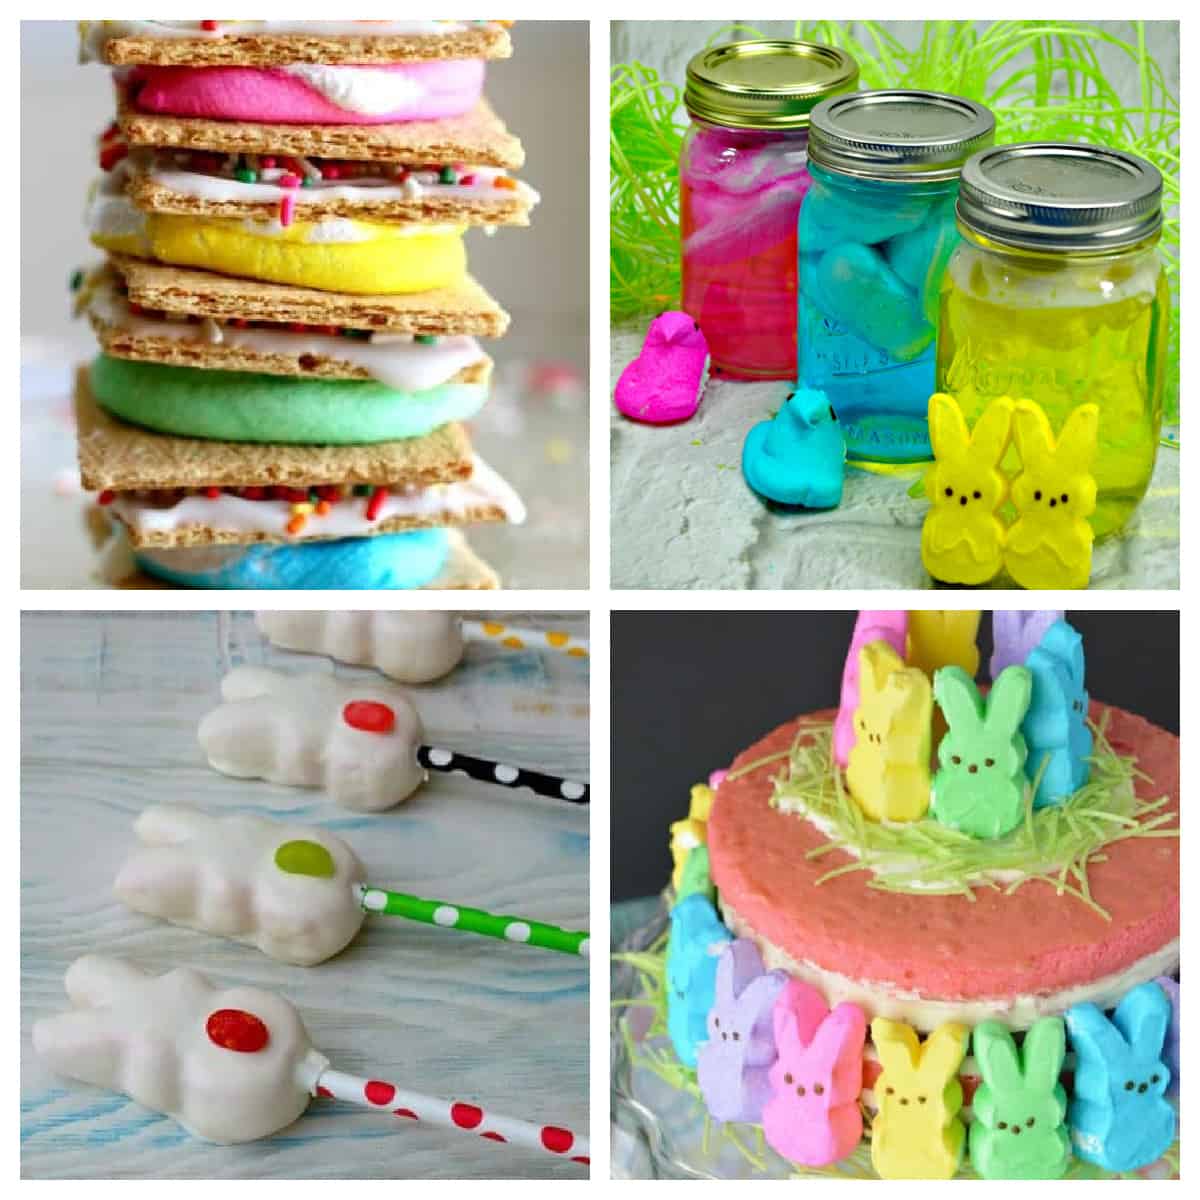 Collage of desserts made with Peeps.